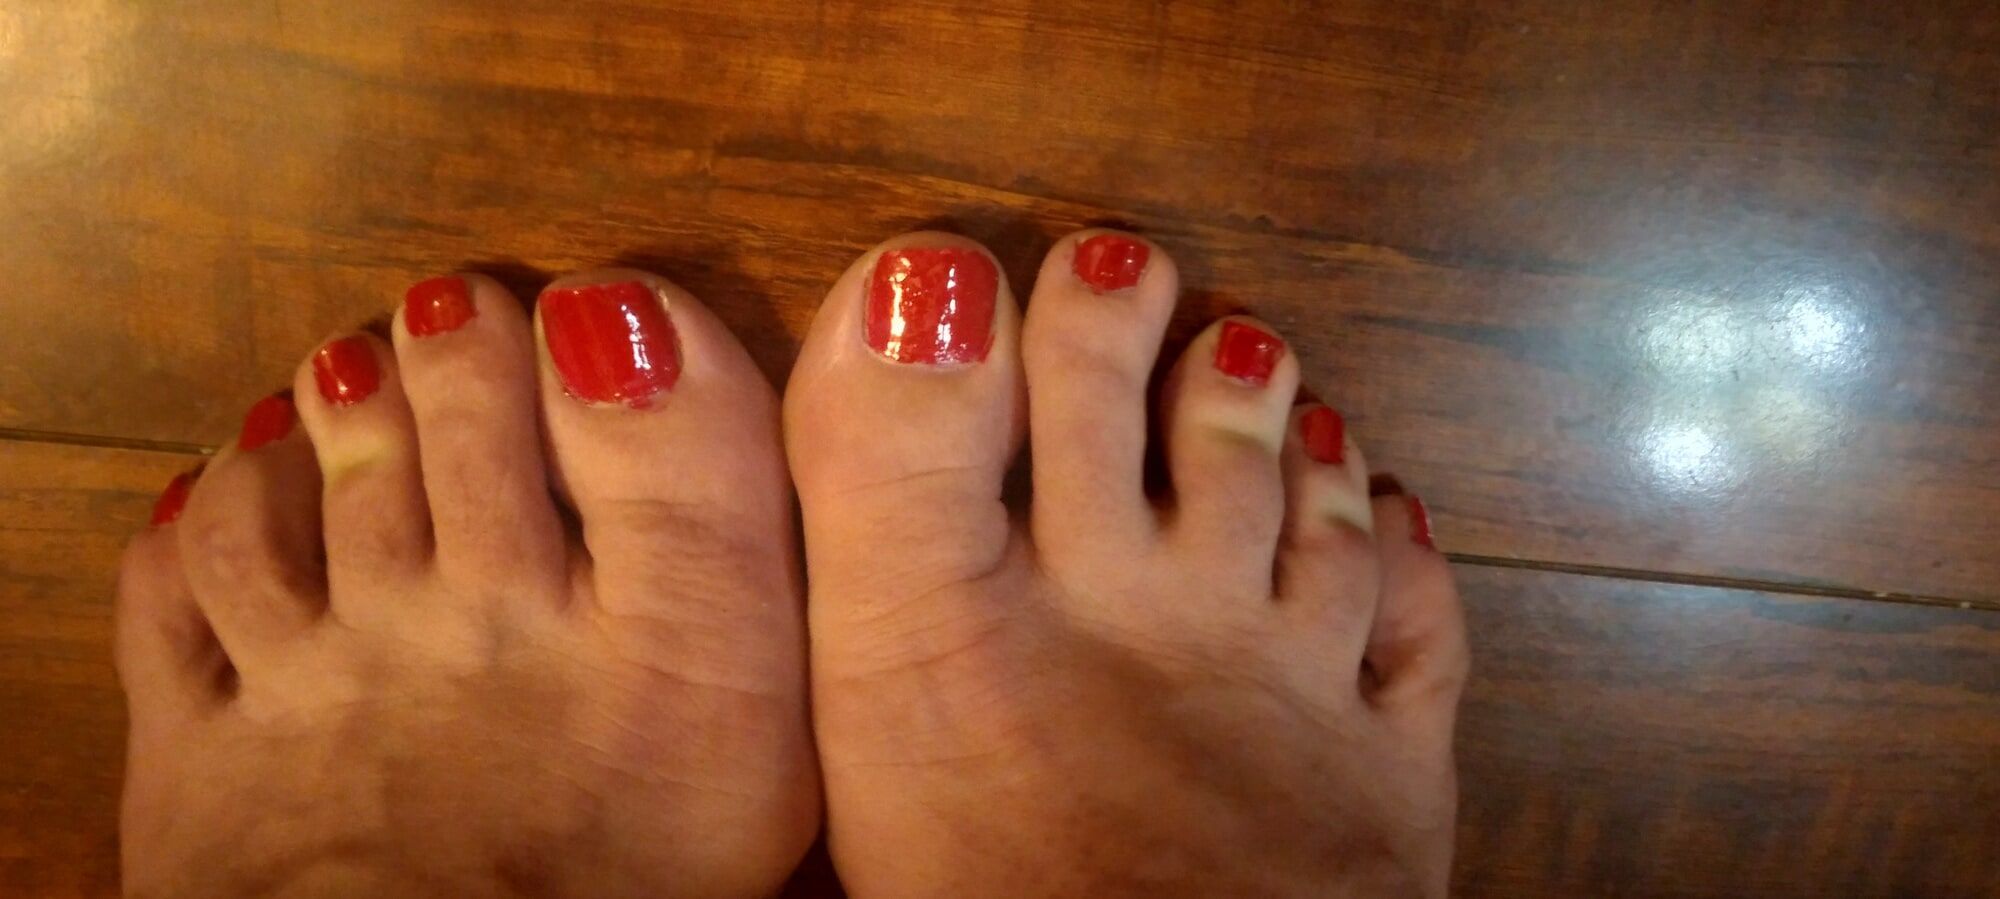 Pics of my feet and they're lookin so sweet. #2